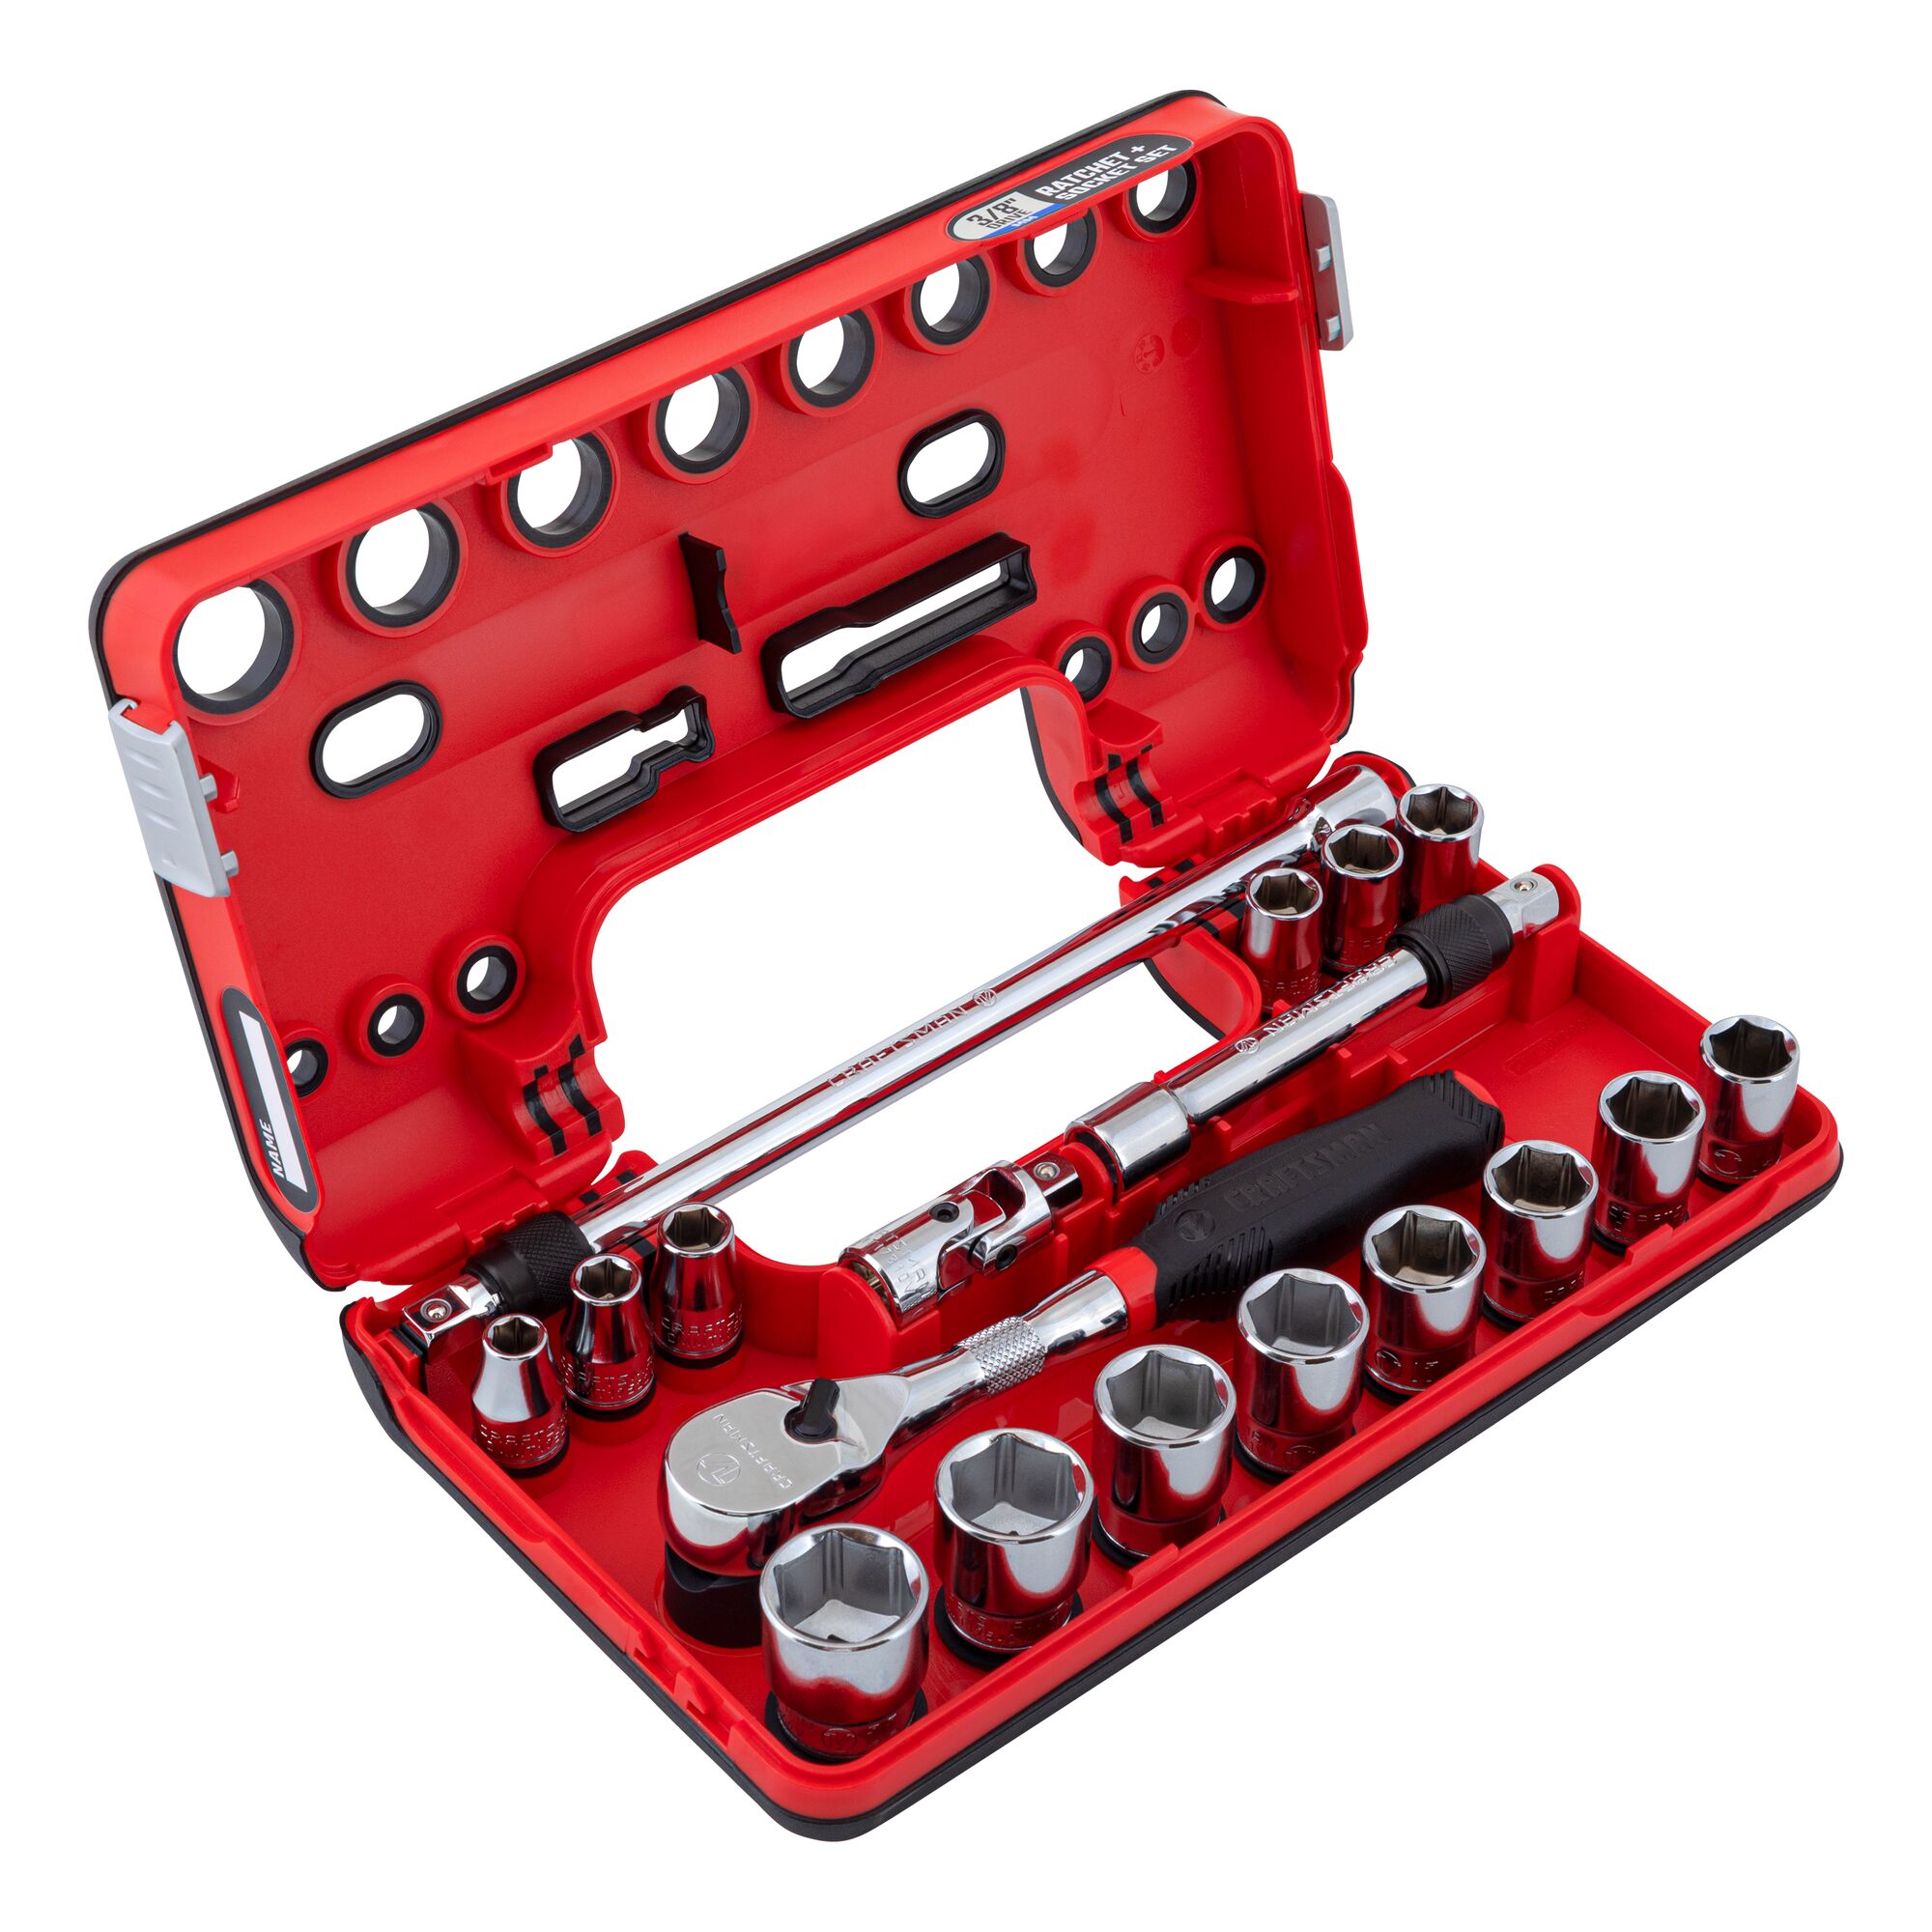 3 eighth inch drive metric 6 point tool set assembled in its case.